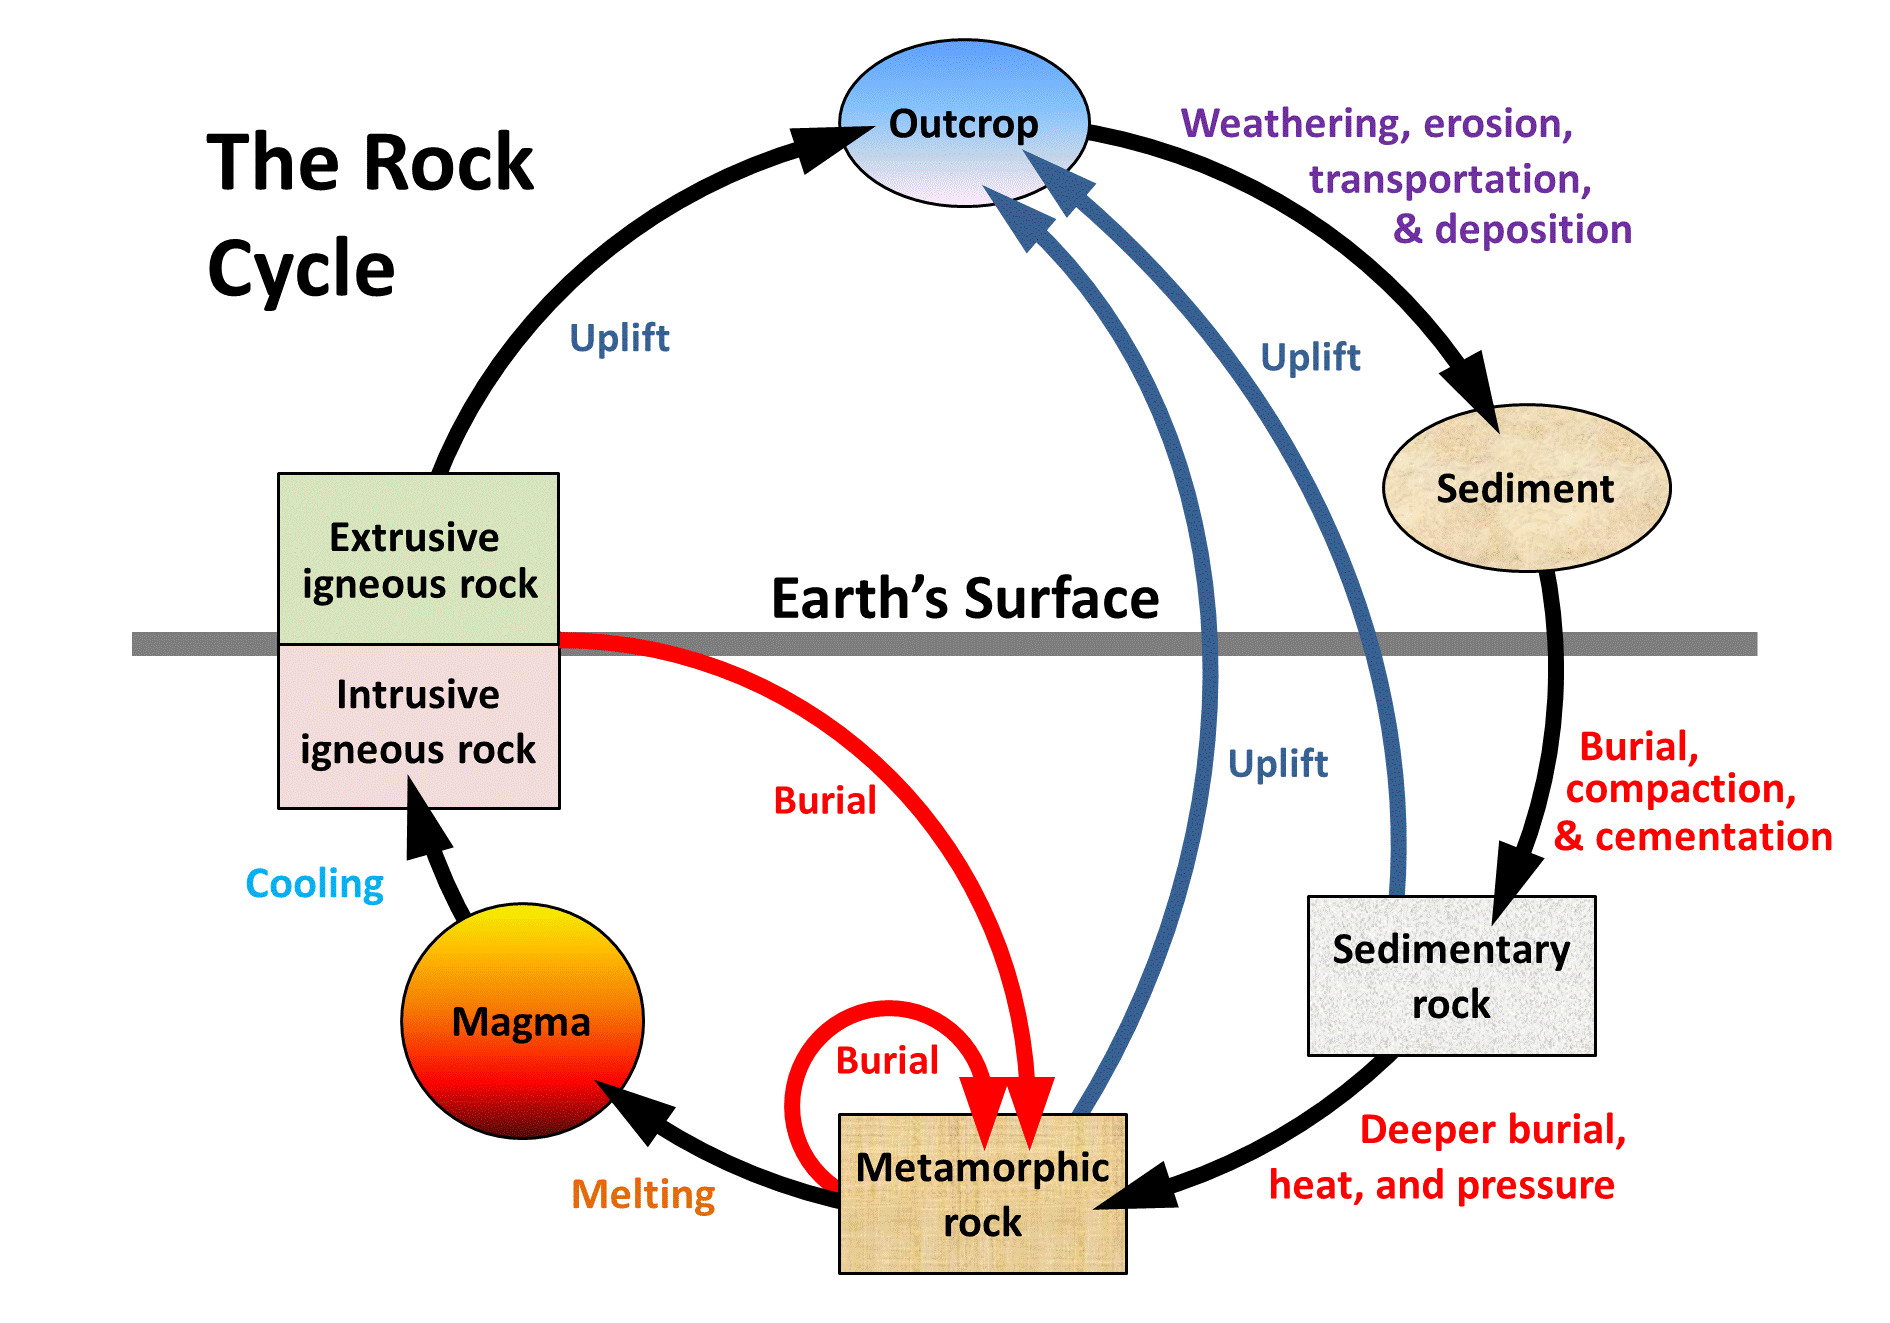 Sep 02, 2019 · rock cycle diagram. 3.1 The Rock Cycle - Physical Geology - 2nd Edition